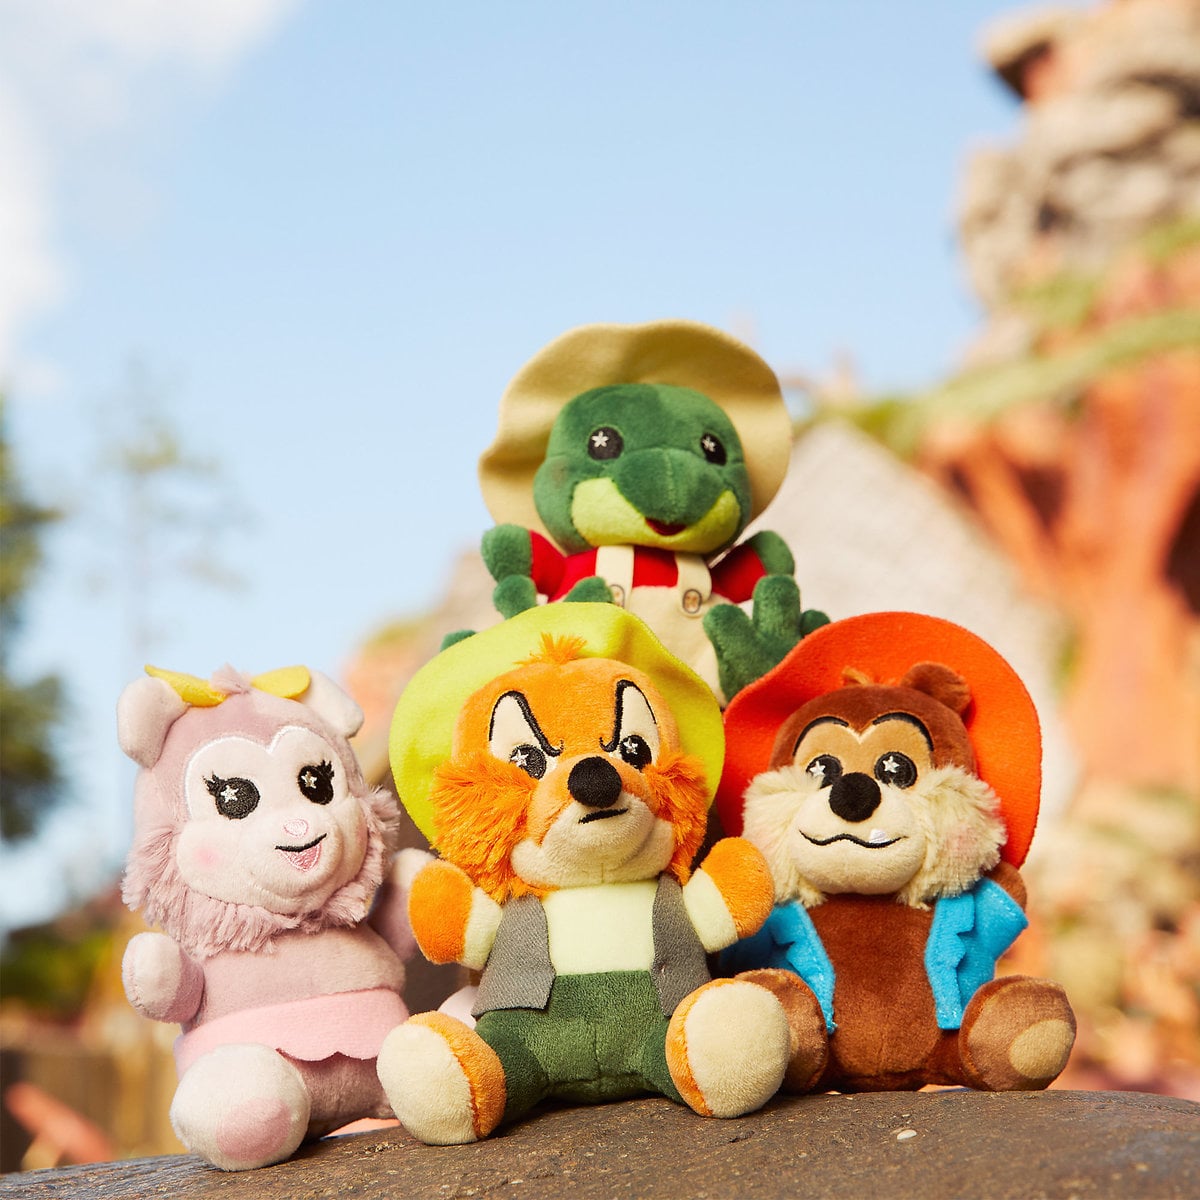 New Splash Mountain Wishables Collection In Celebration of 30th Anniversary